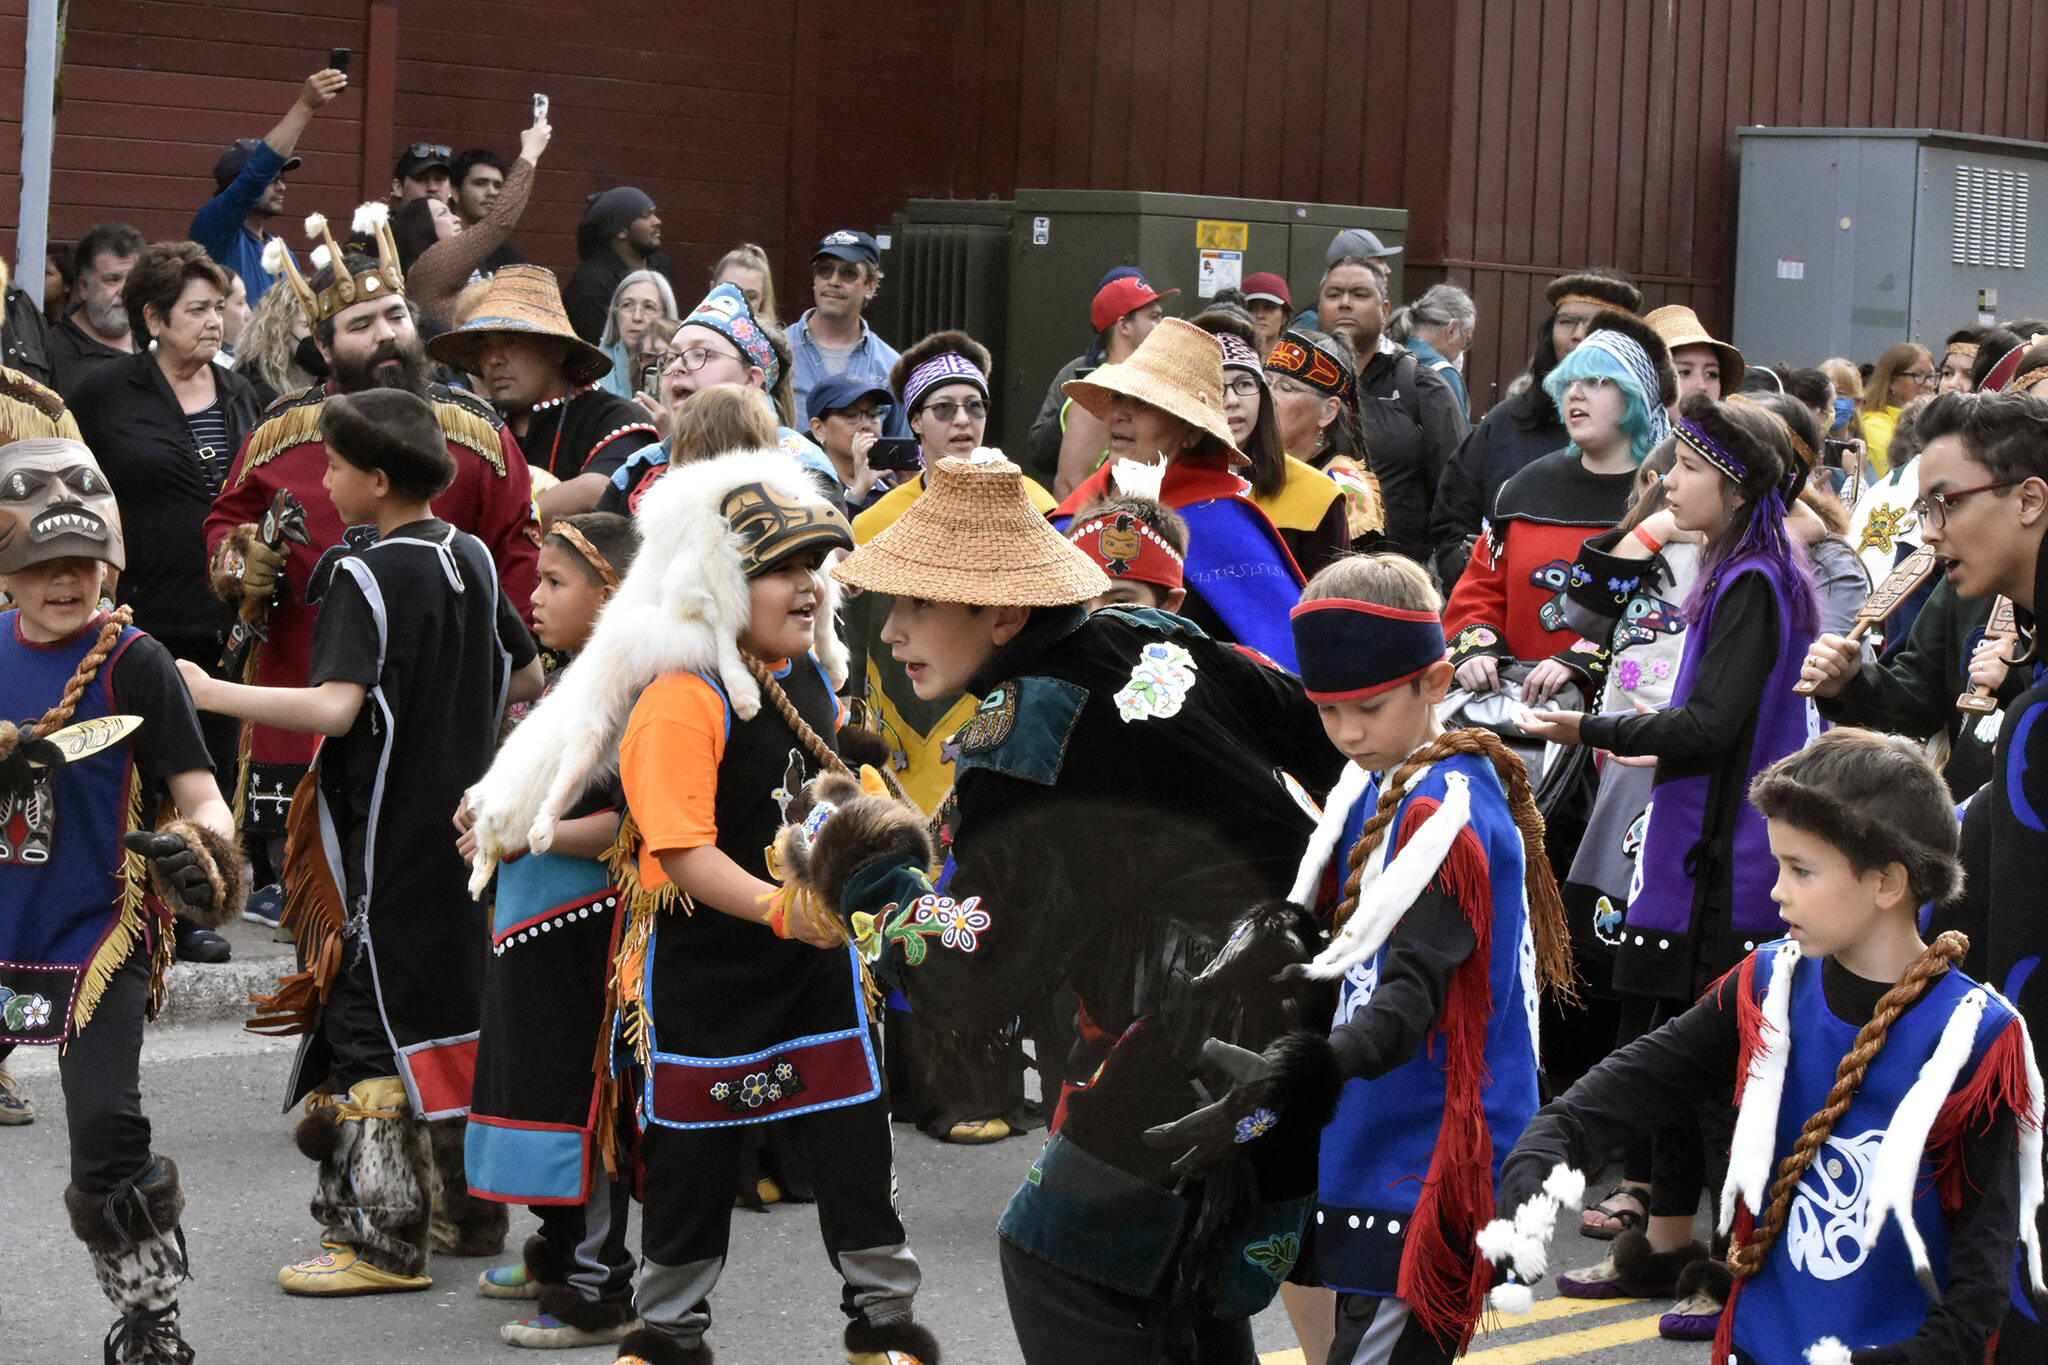 Dozens of dance groups were lined up on Willoughby Avenue on Wednesday, June 8, 2022, getting ready for the grand procession through Centennial Hall for Celebration 2022. Many groups were dancing and singing well before they entered the hall. (Peter Segall / Juneau Empire)